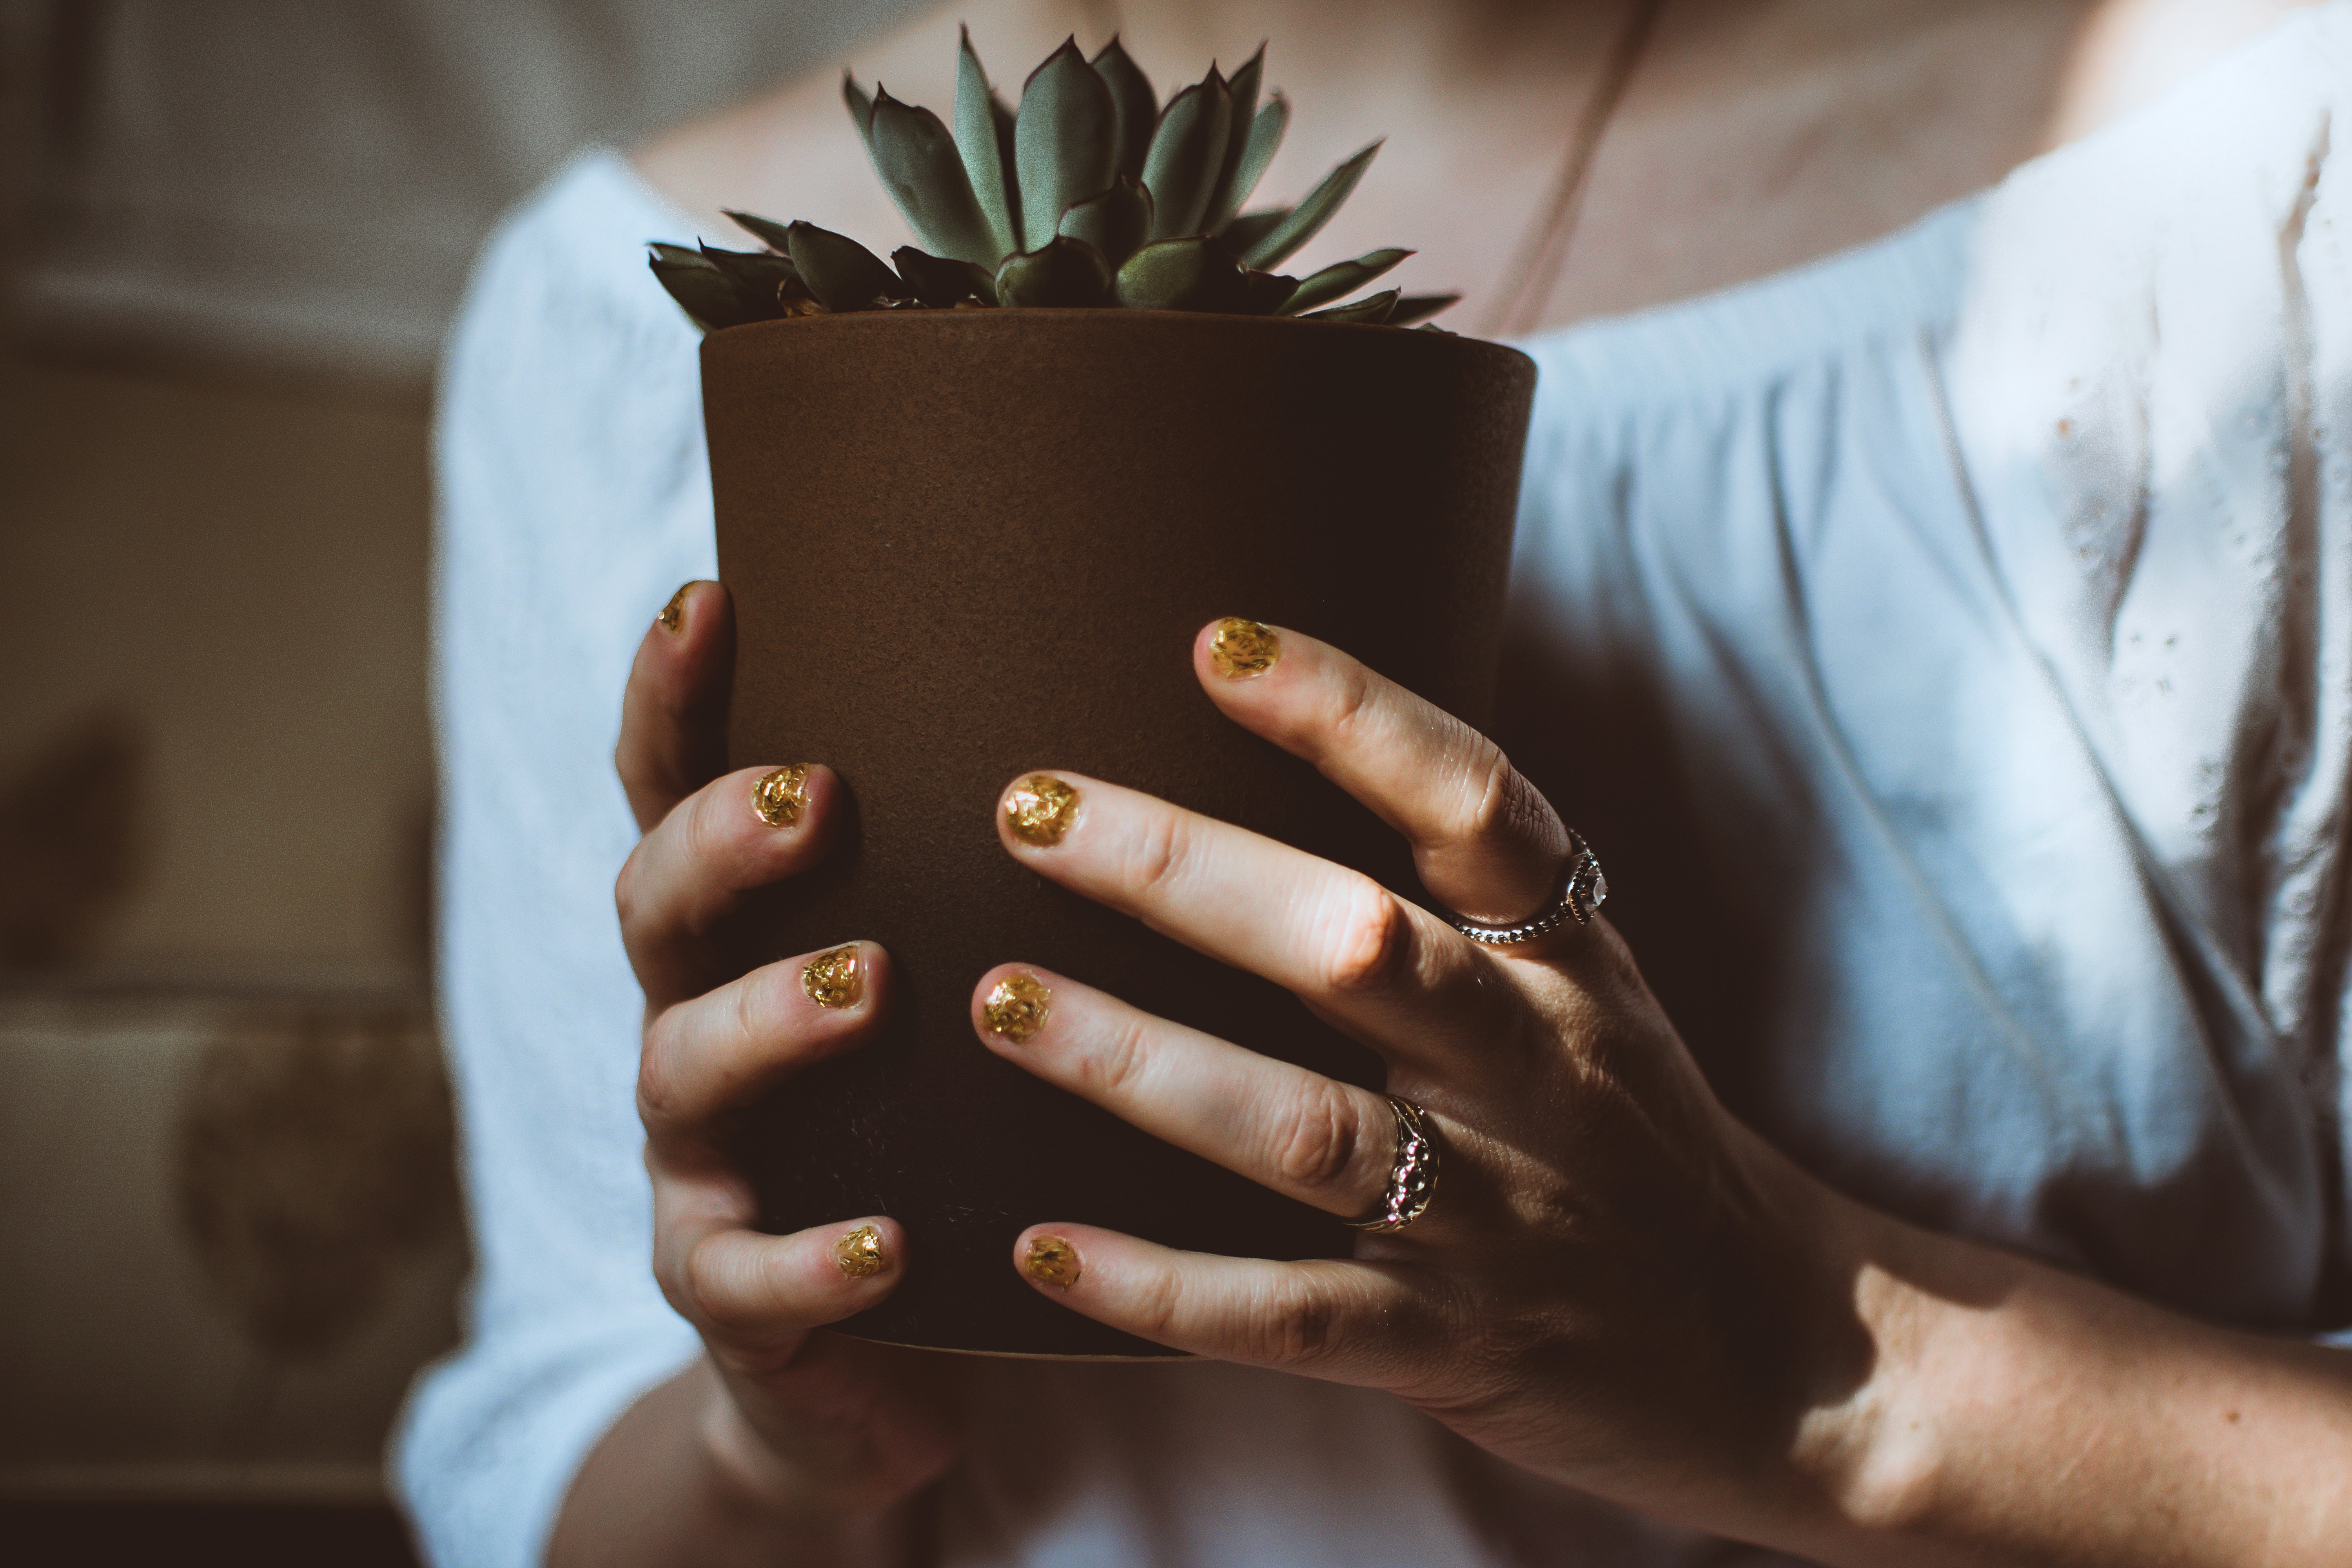 A person holding a brown plant pot